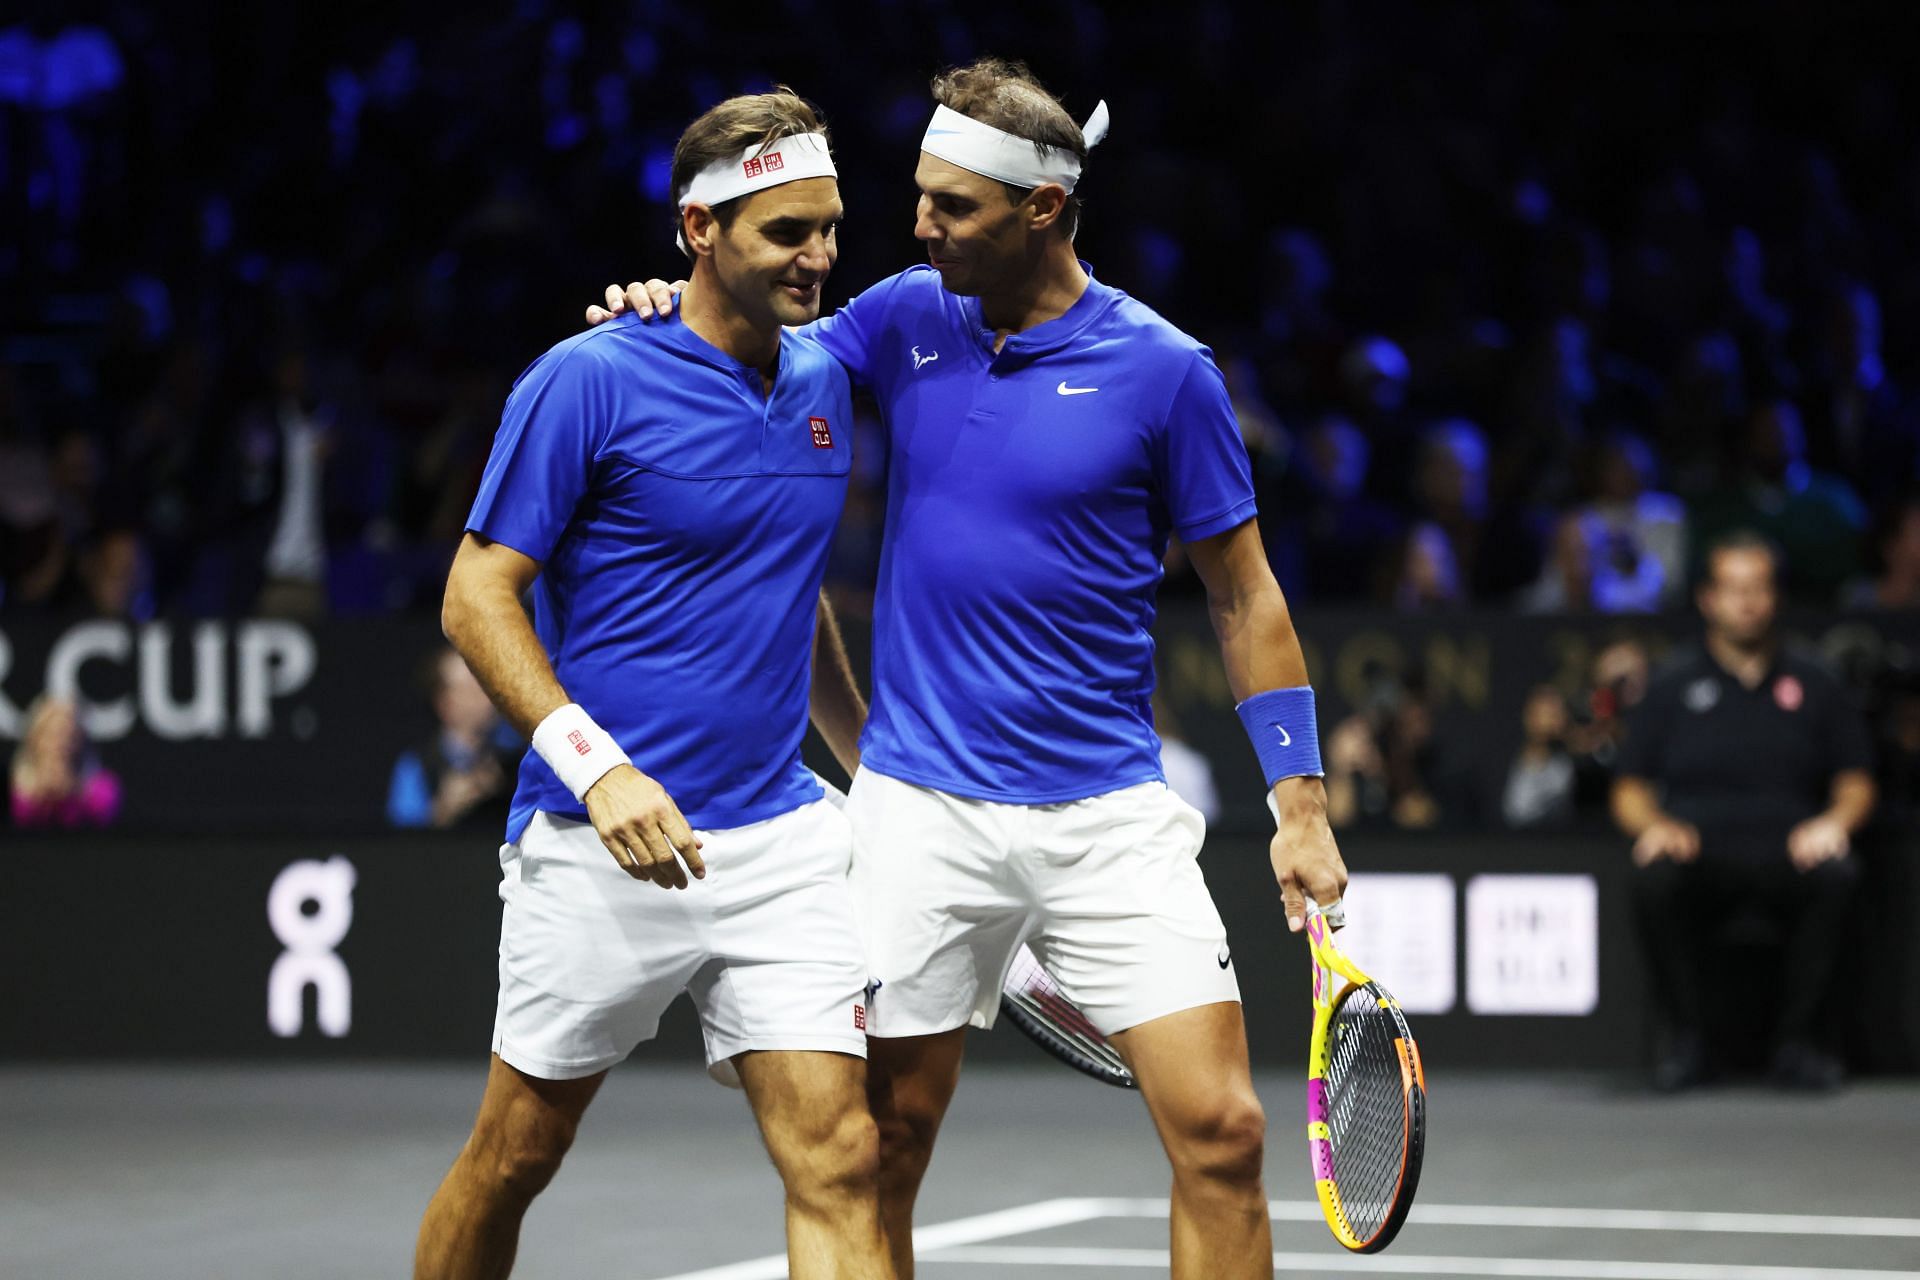 Roger Federer and Rafael Nadal pictured during the Laver Cup 2022